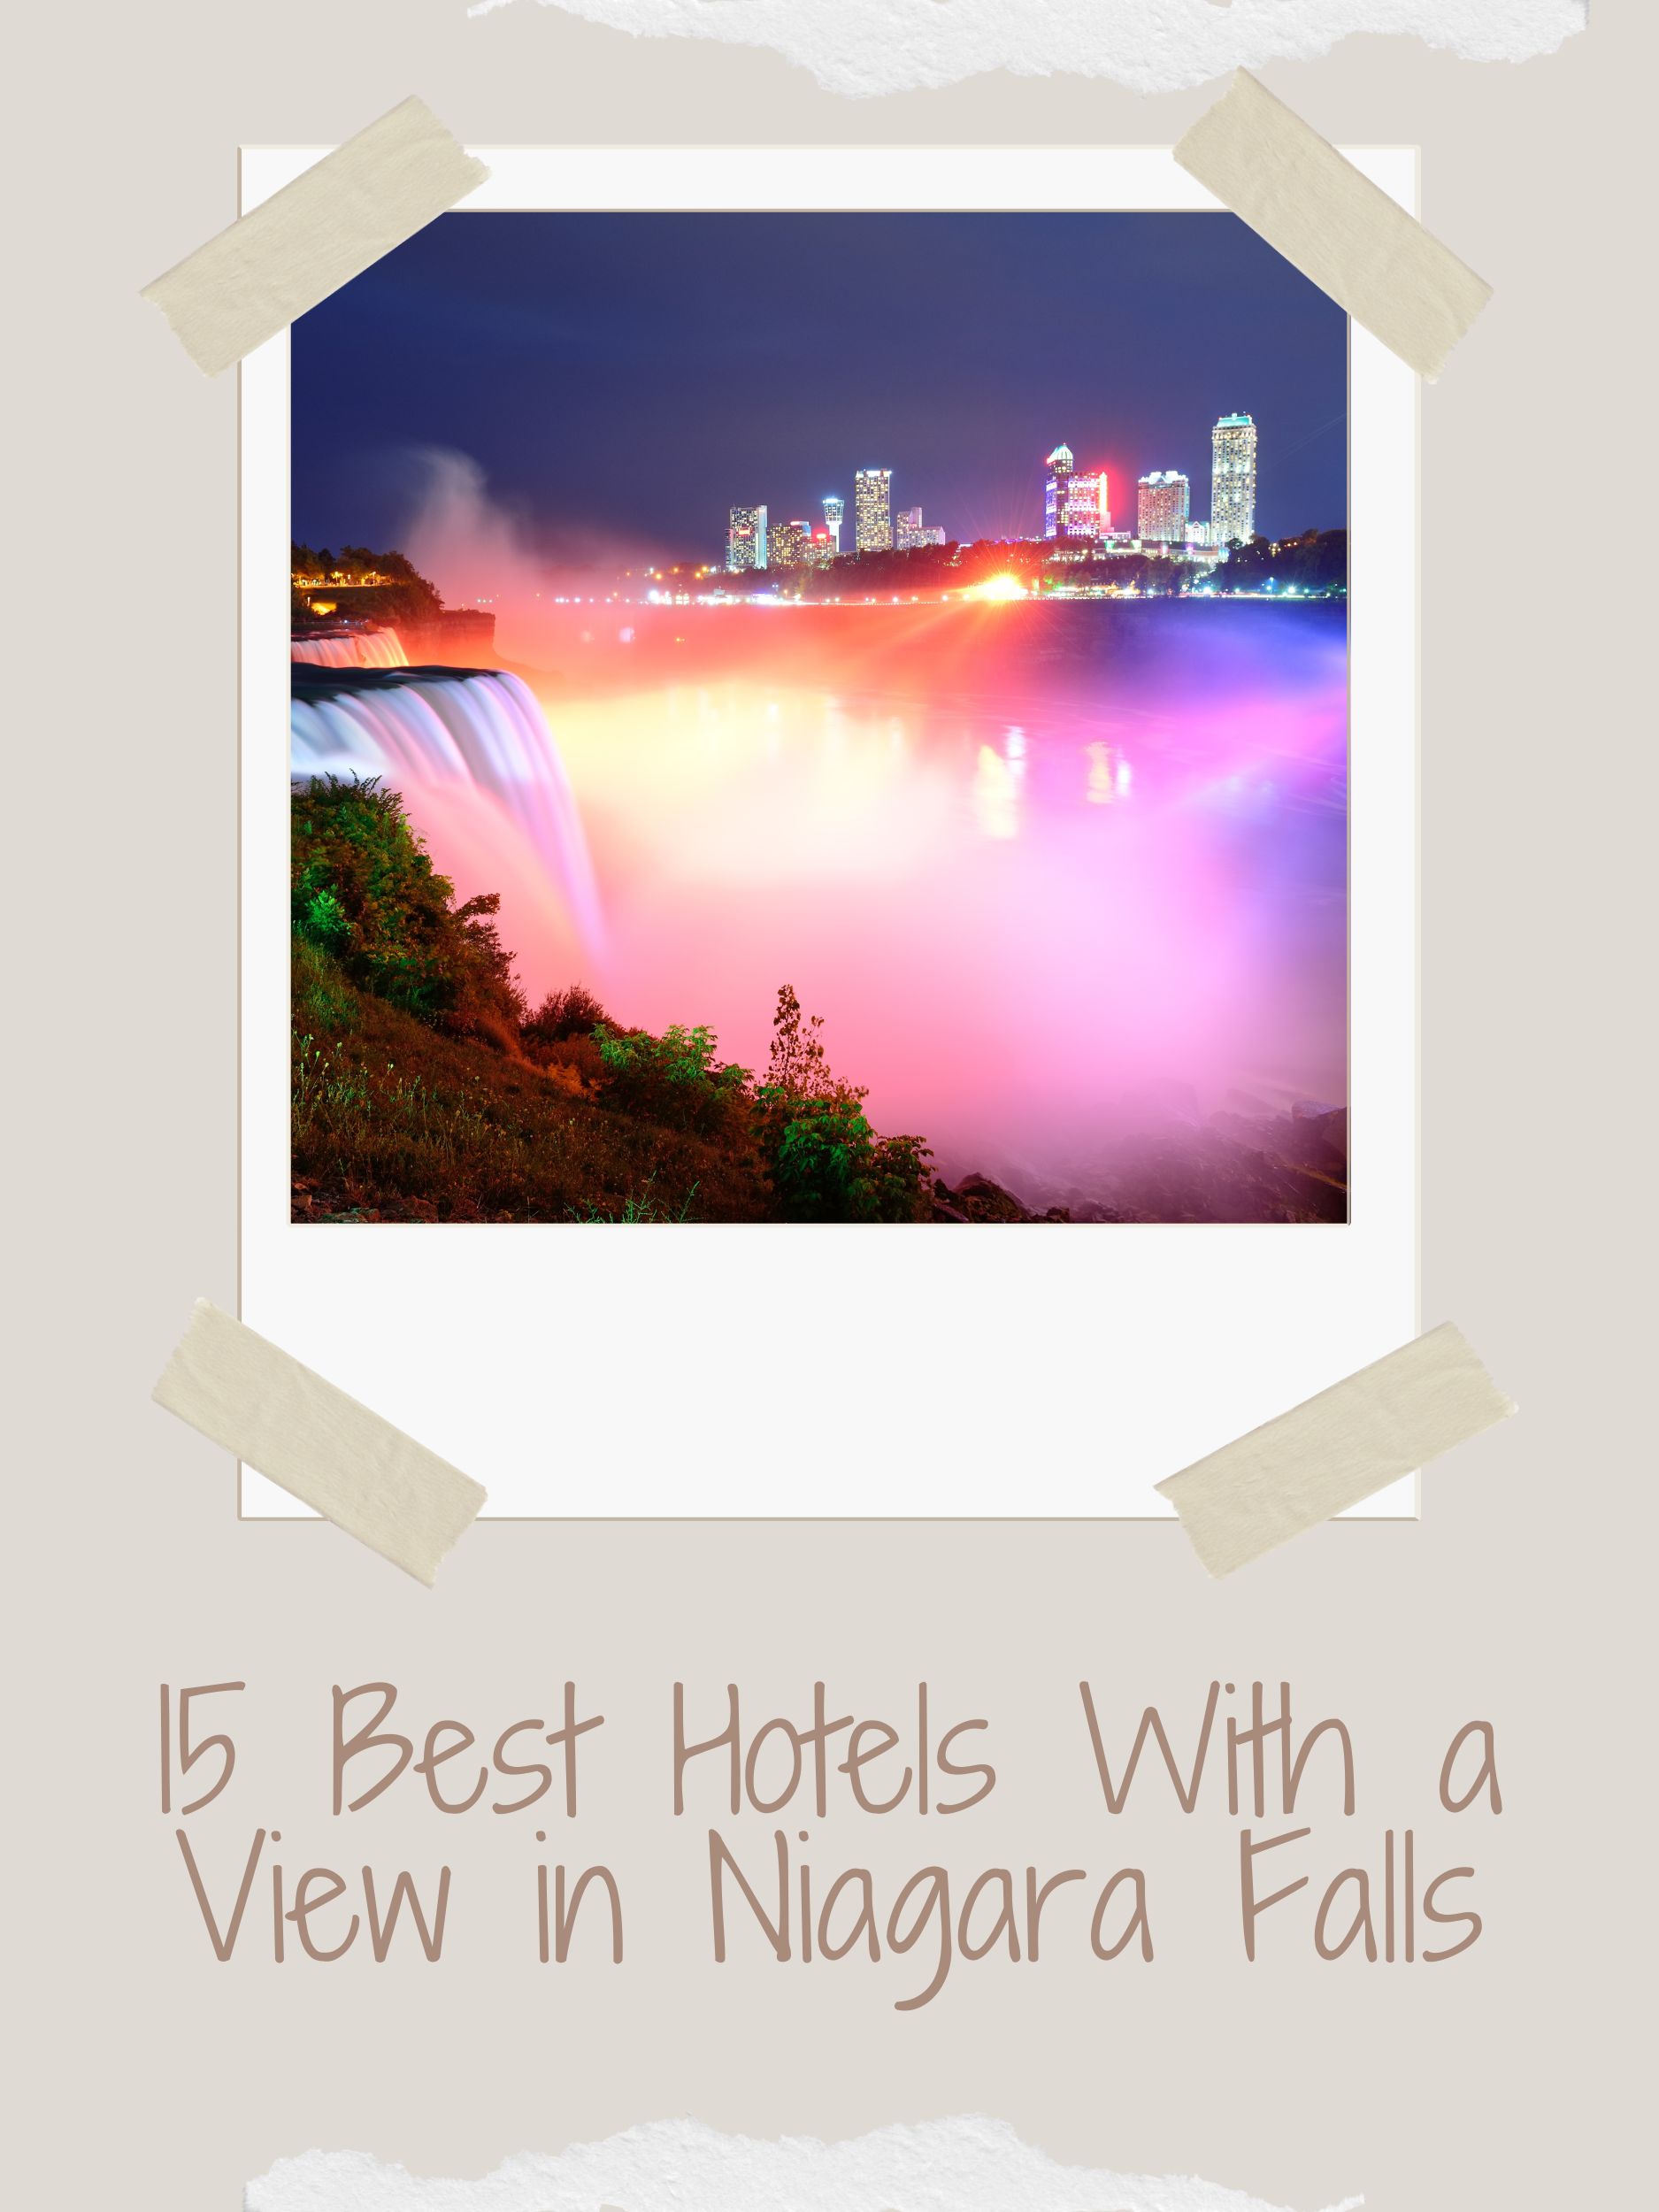 The Top Hotels for the Best Views of Niagara Falls